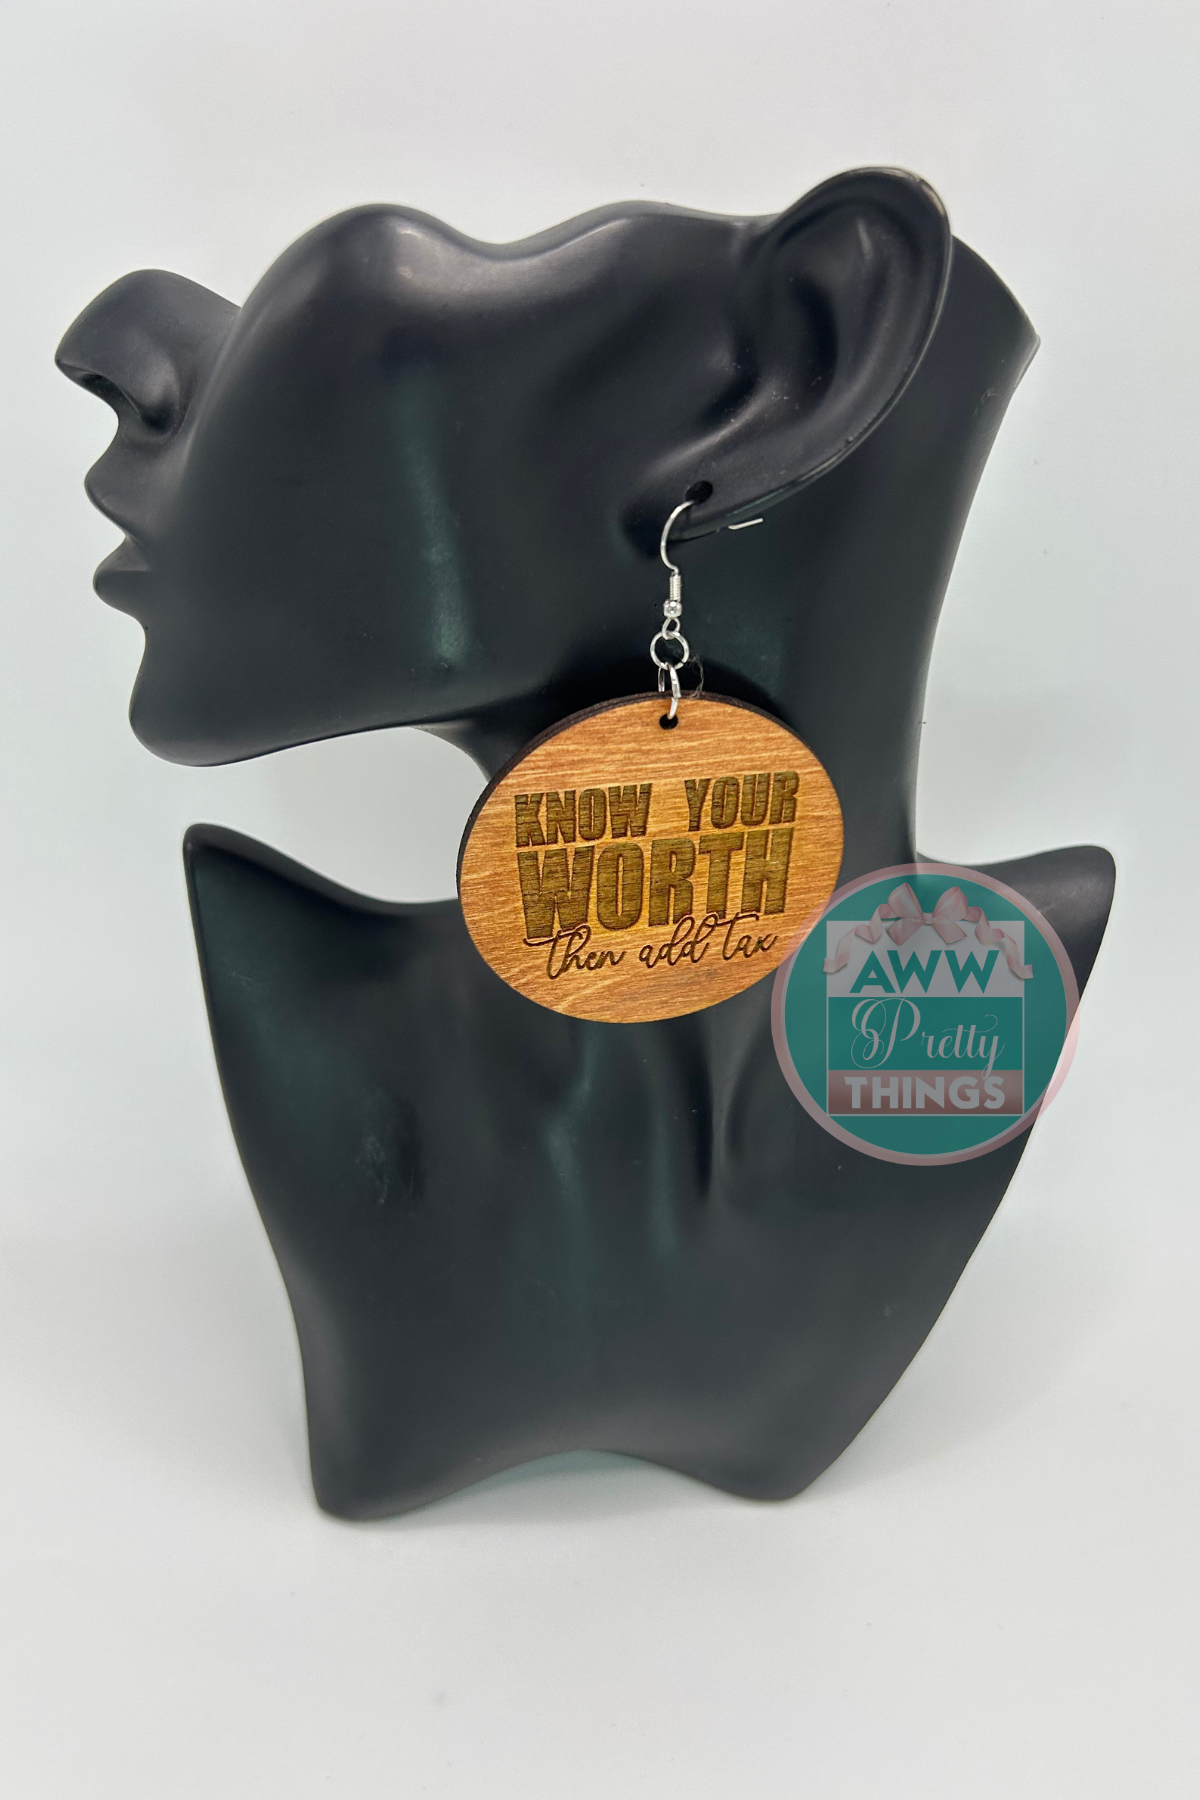 Know Your Worth Then Add Tax Engraved Earrings